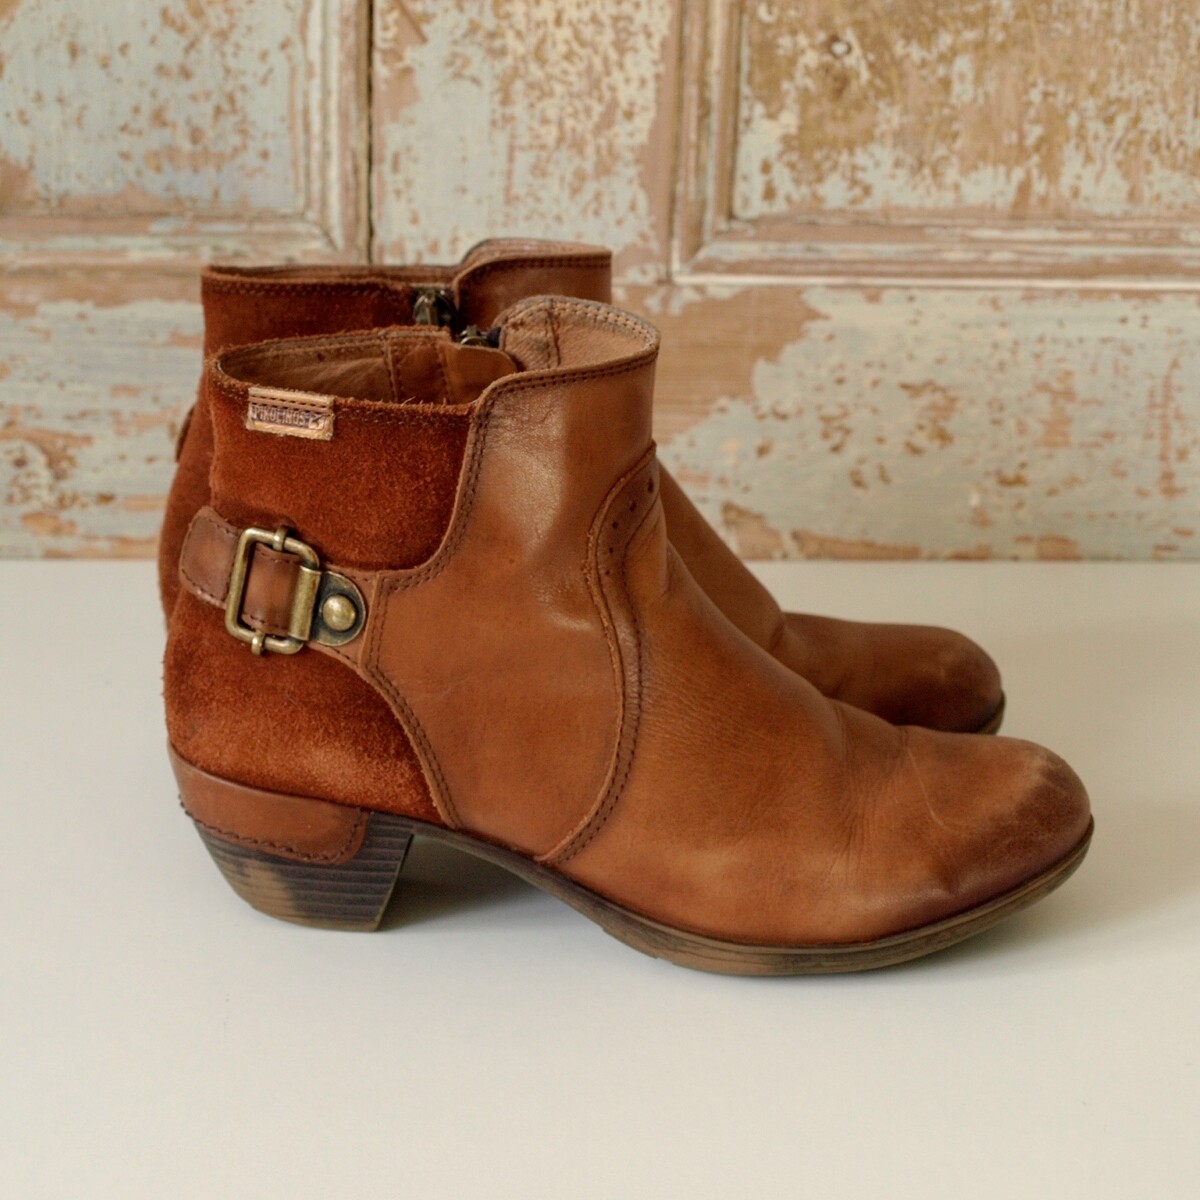 Ladies Pikolinos Tan Leather Cowbow Ankle Boots 4